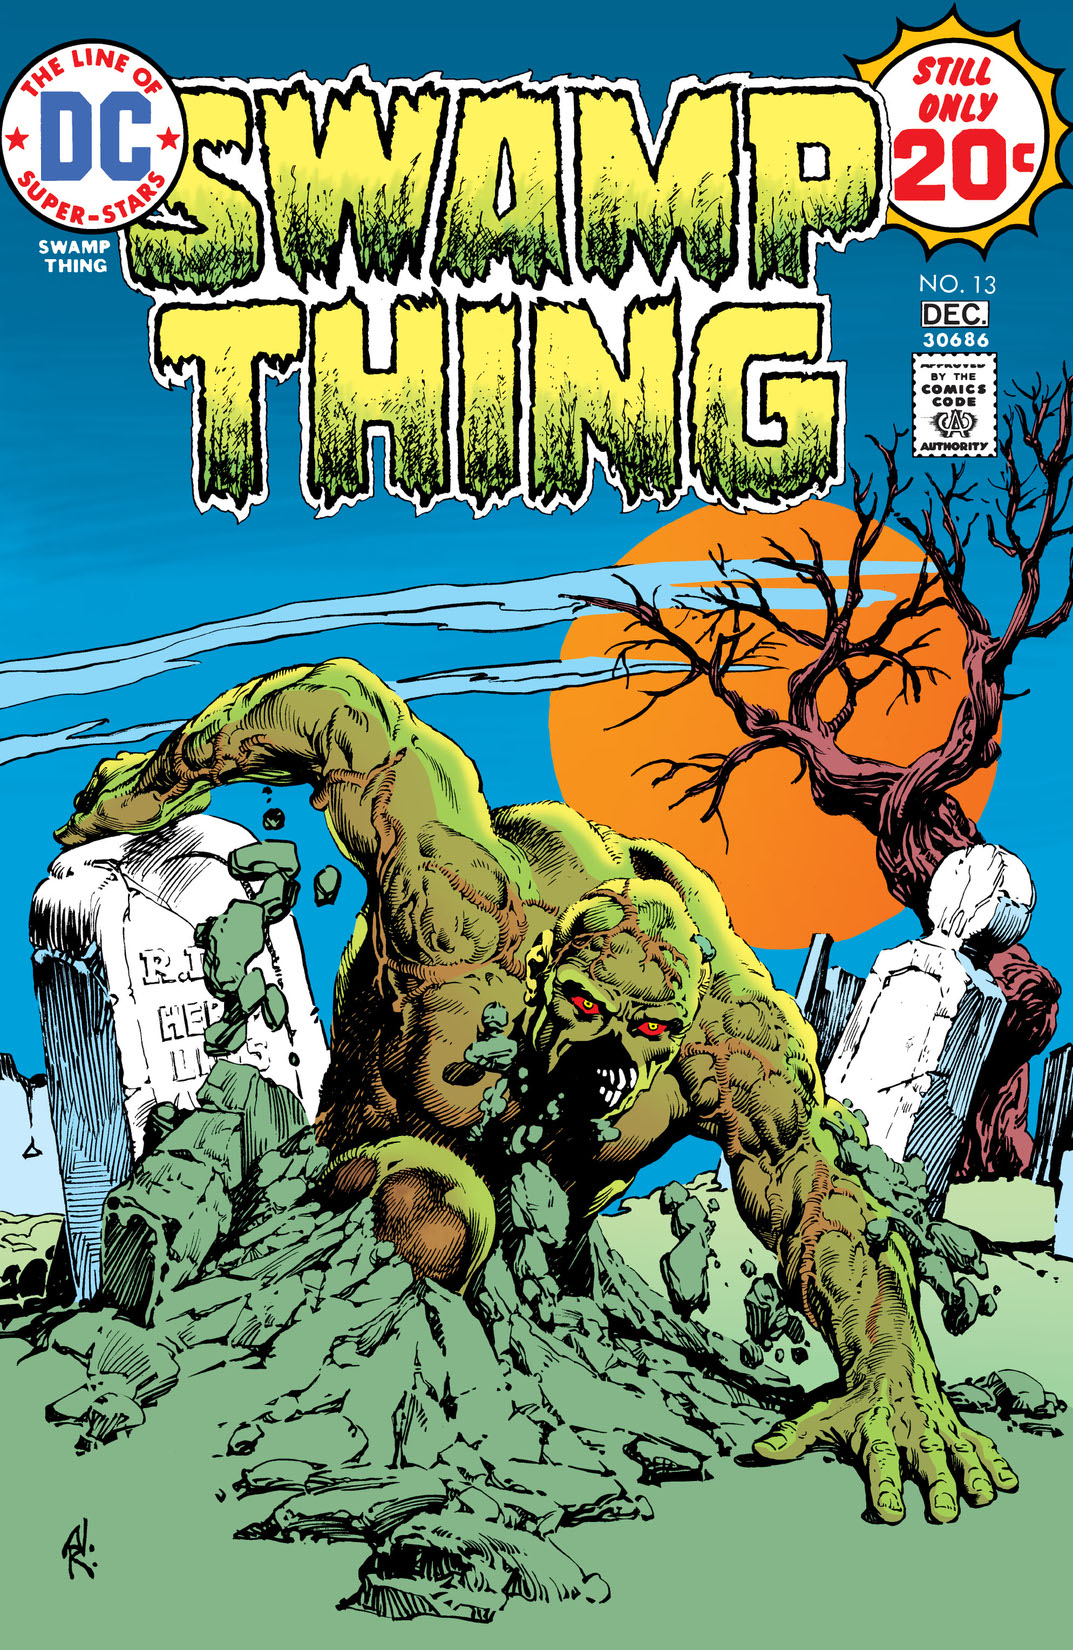 Swamp Thing (1972-) #13 preview images